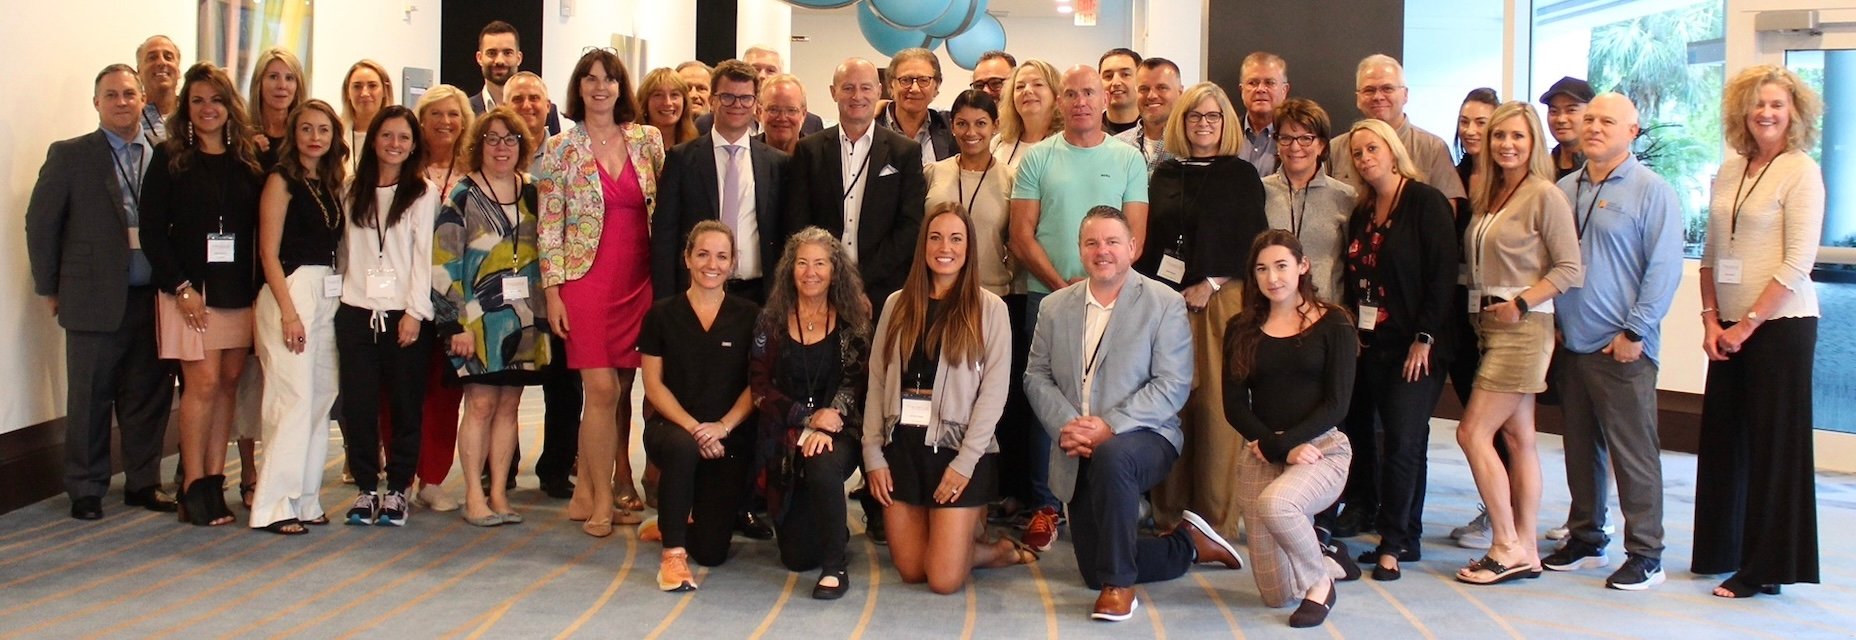 Full Group Event Photo in Fort Laudredale - AWT for Aesthetics, Dermatology, and Wound Healing